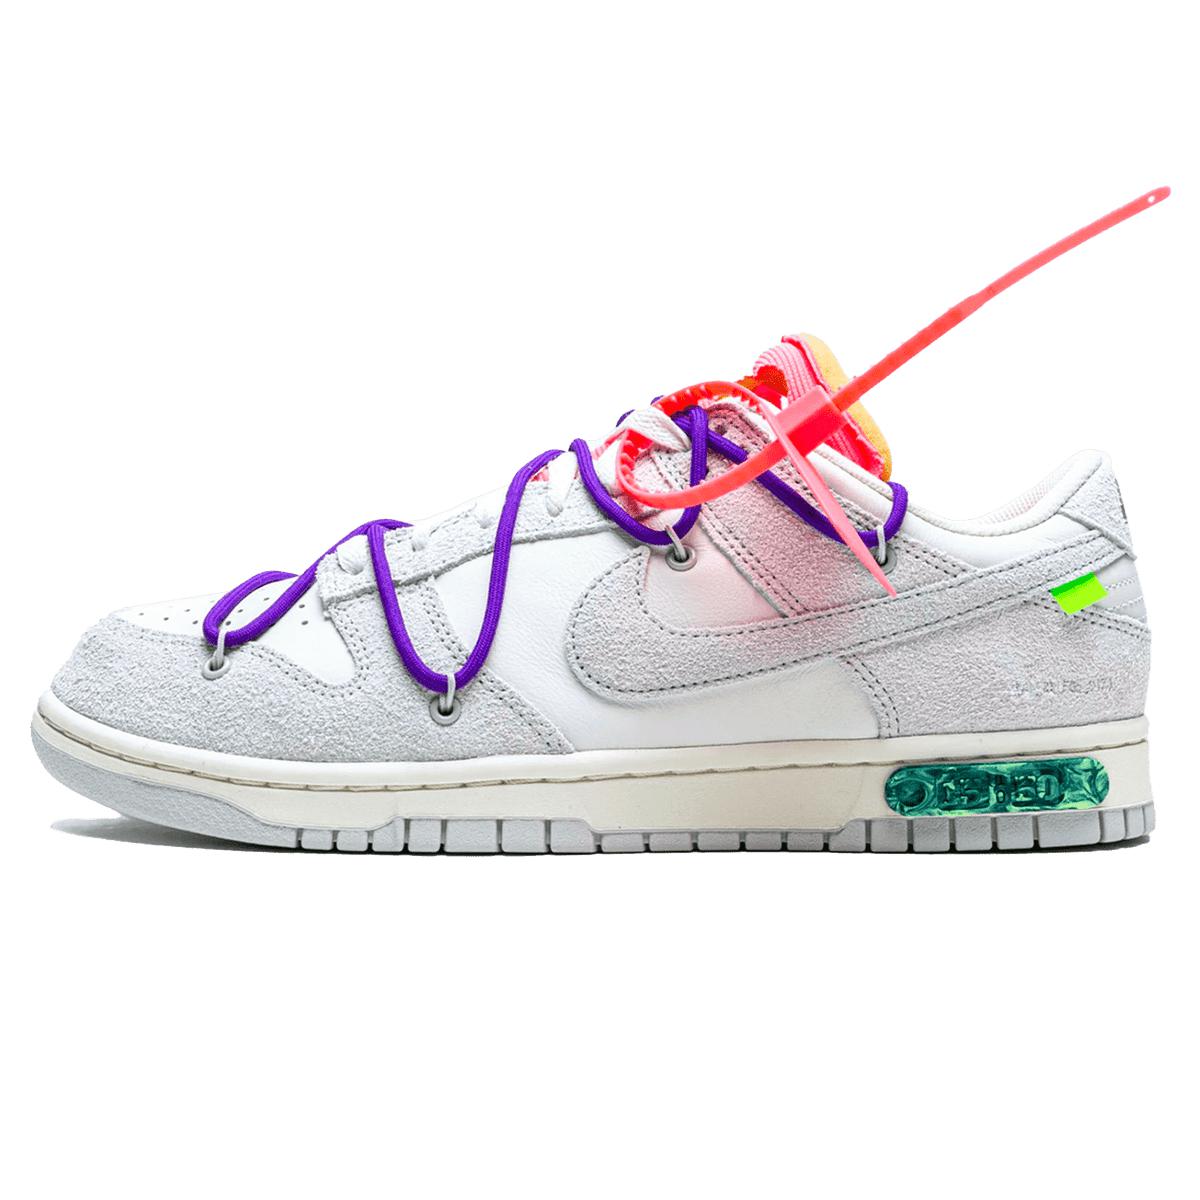 Nike Dunk Low x Off-White Lot 15 of 50 2021 sz 9